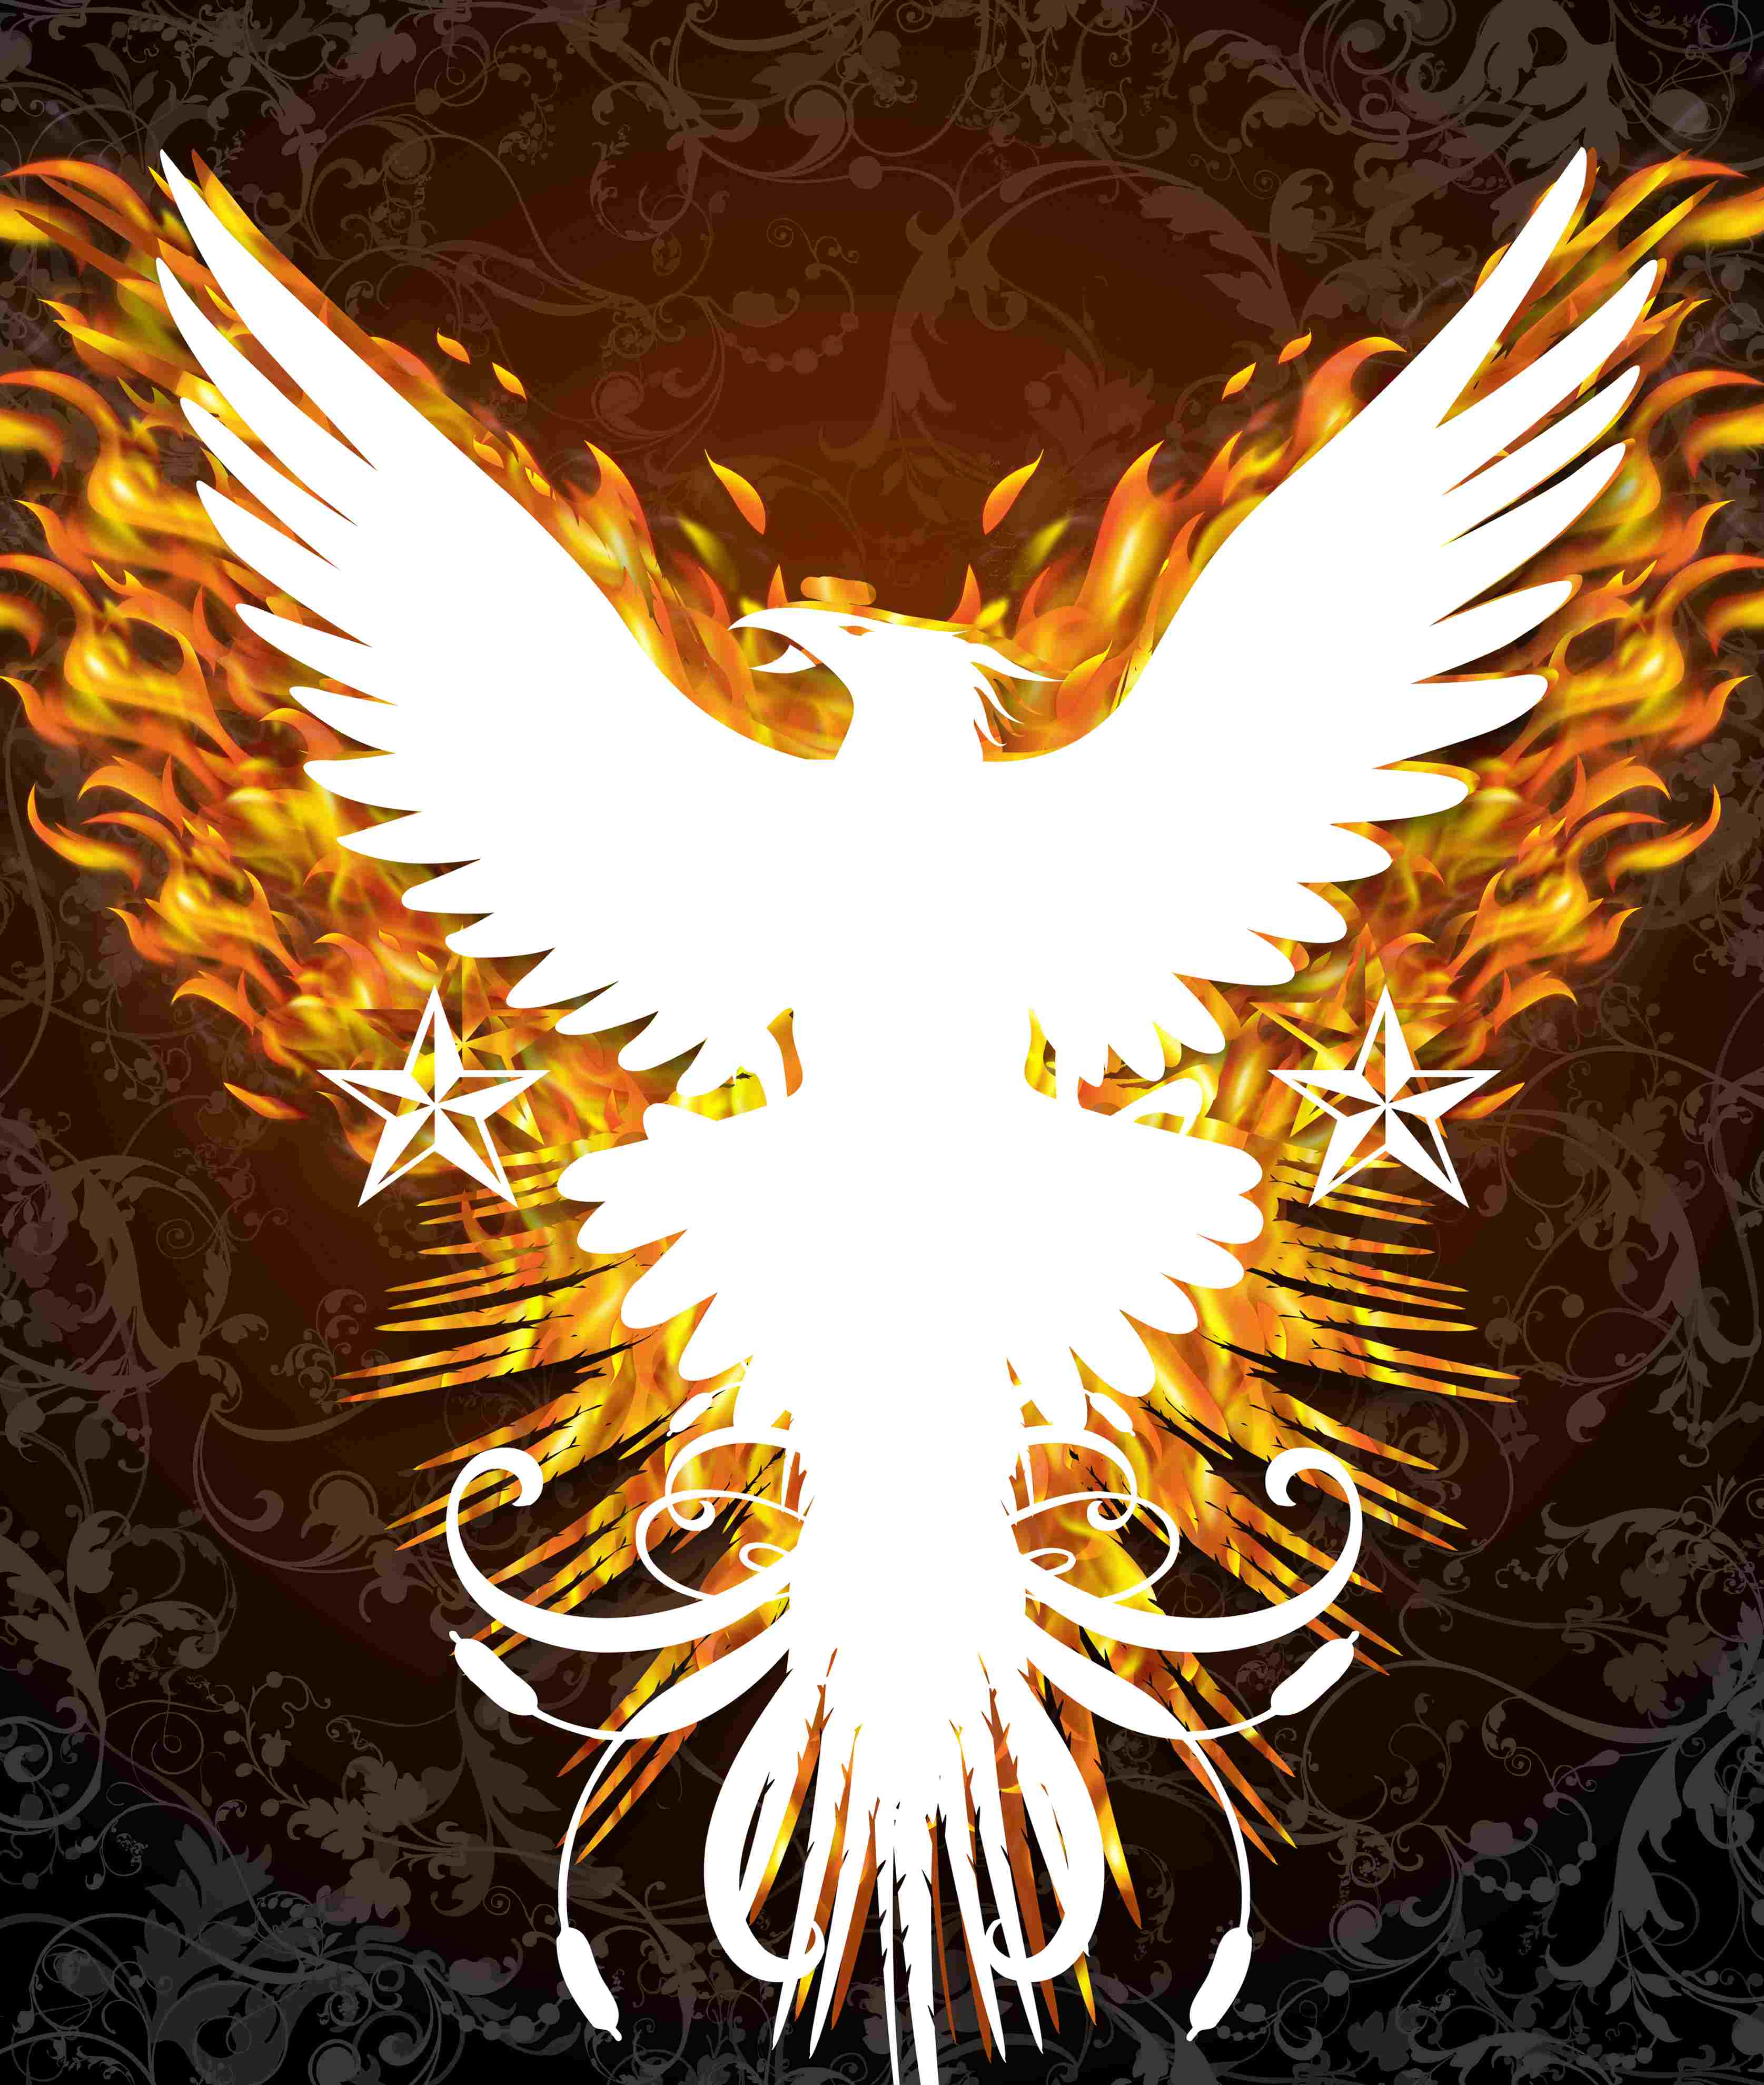 The Phoenix Lab - Blue Phoenix Rising From The Ashes - 3350x3960 Wallpaper  